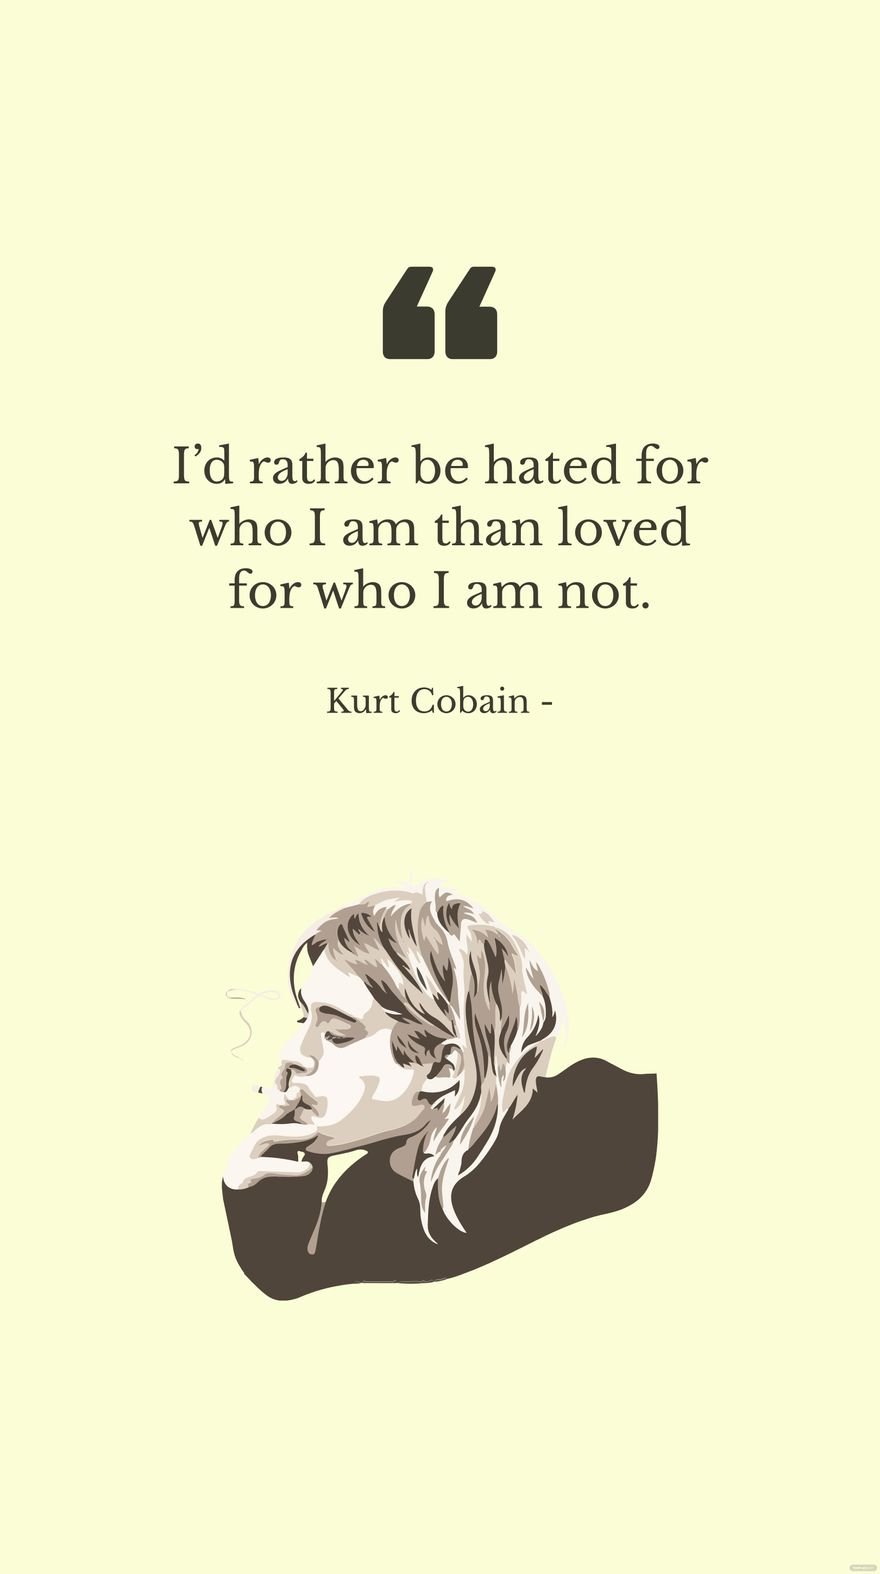 Free Kurt Cobain - I’d rather be hated for who I am than loved for who I am not. in JPG